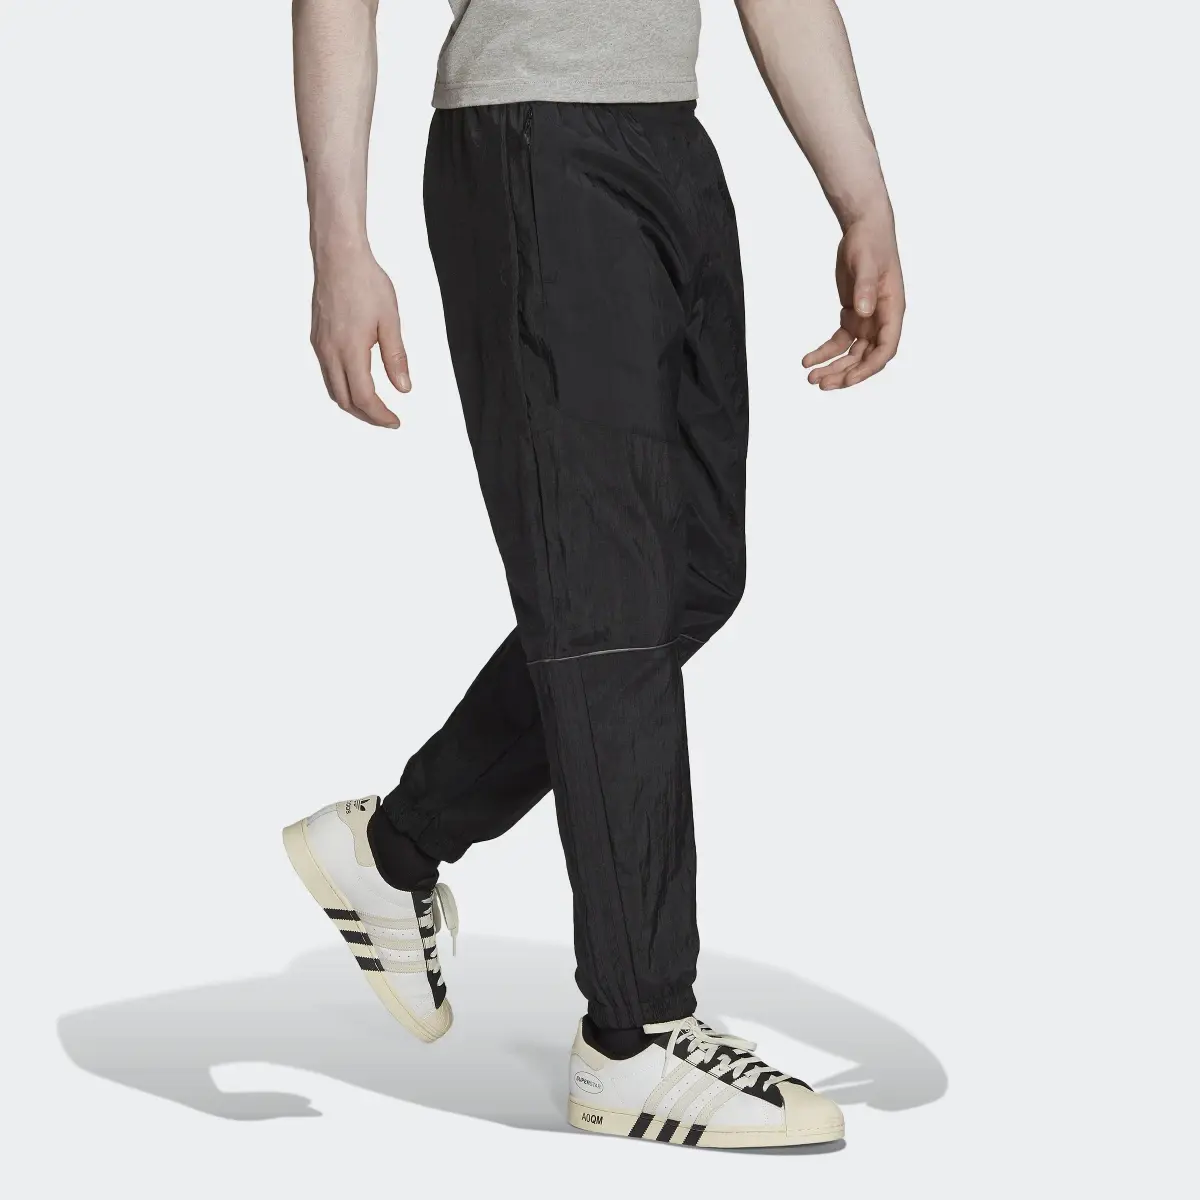 Adidas Reveal Material Mix Track Pants. 3